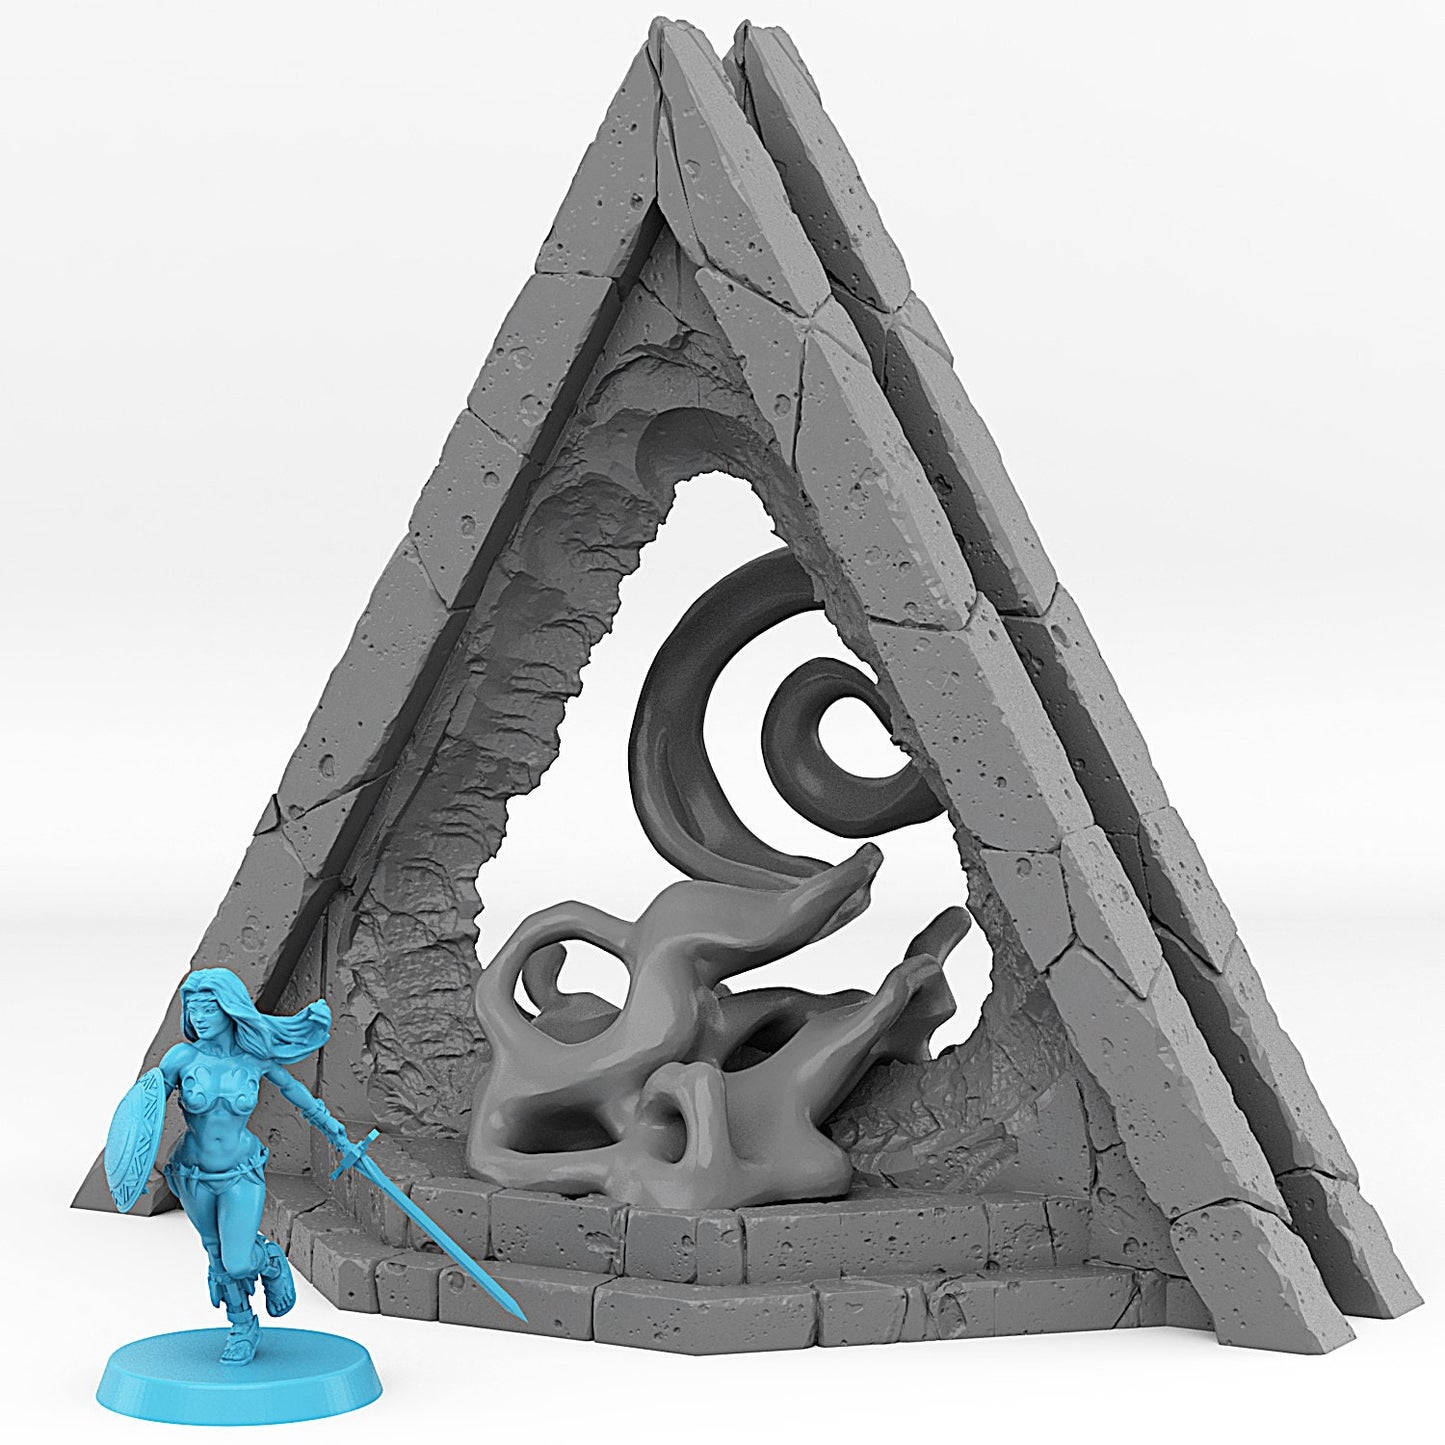 Alien Pyramid Portal | Scenery and terrain | 3D Printed Resin Miniature | Tabletop Role Playing | AoS | D&D | 40K | Pathfinder